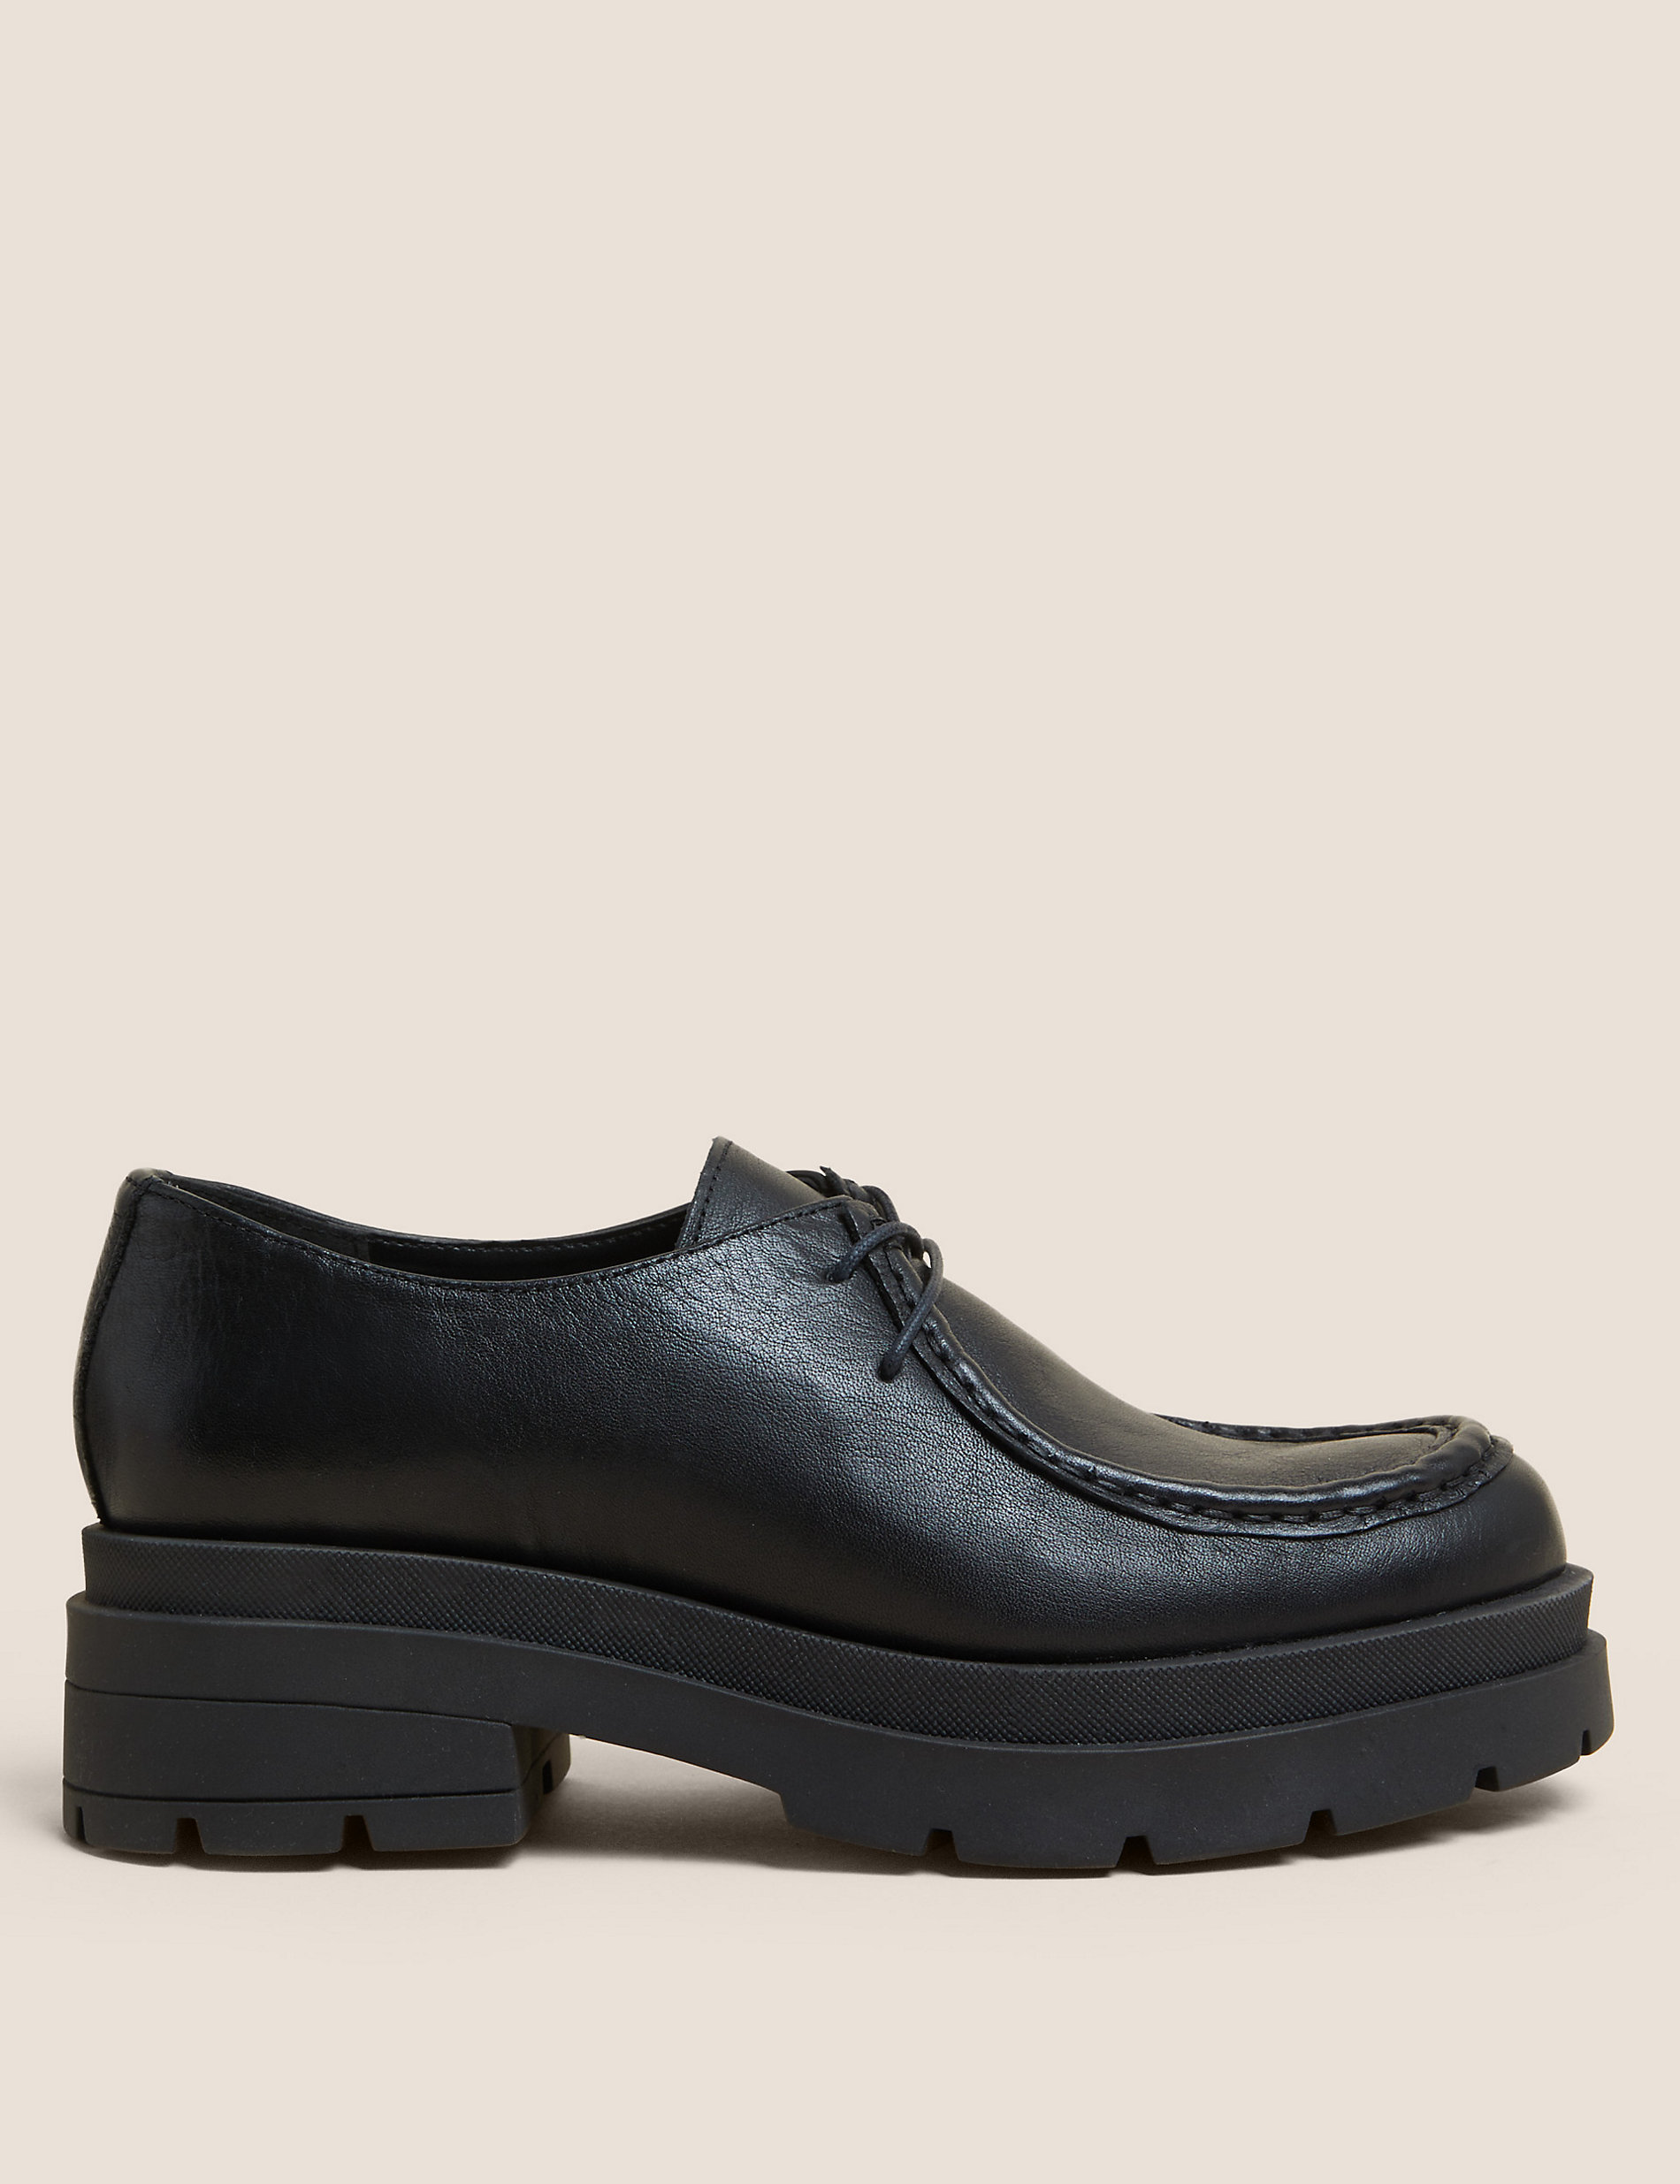 Leather Lace Up Block Heel Brogues